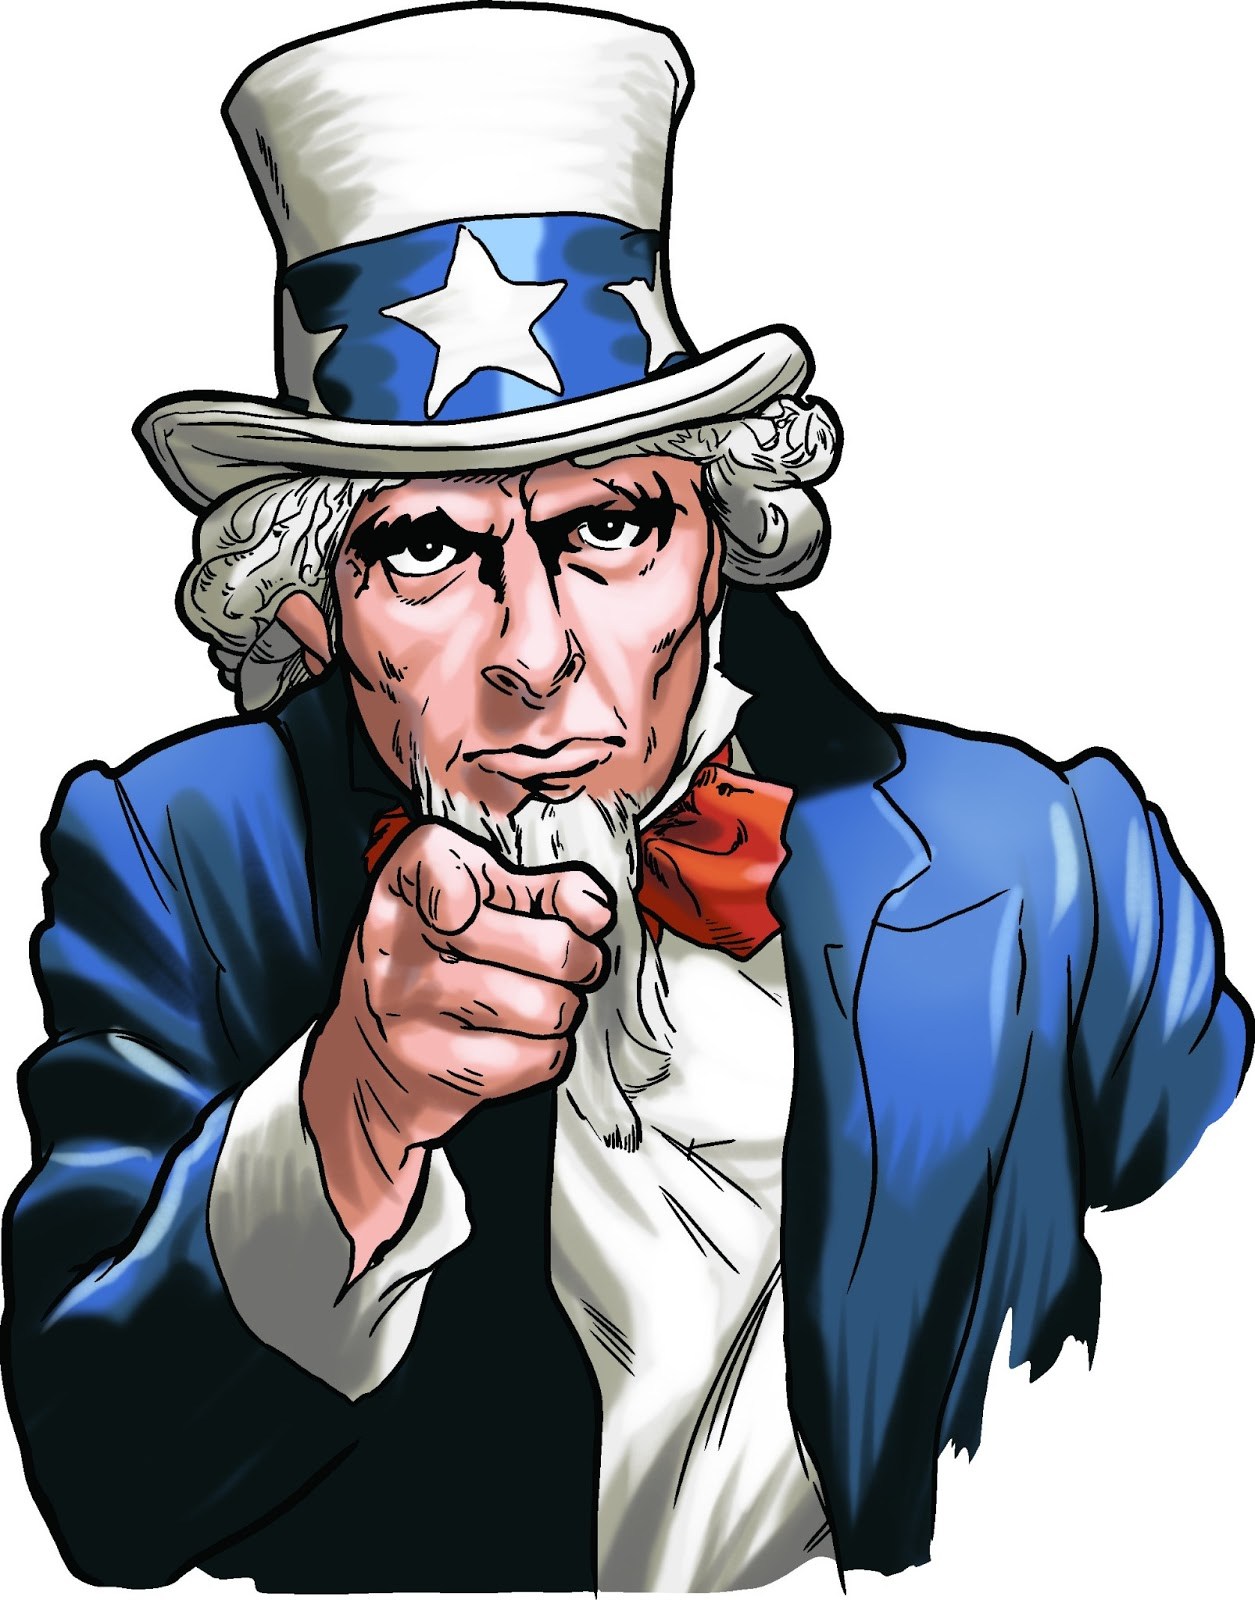 Uncle Sam Poster Template. want you blank uncle sam blanks i want ...